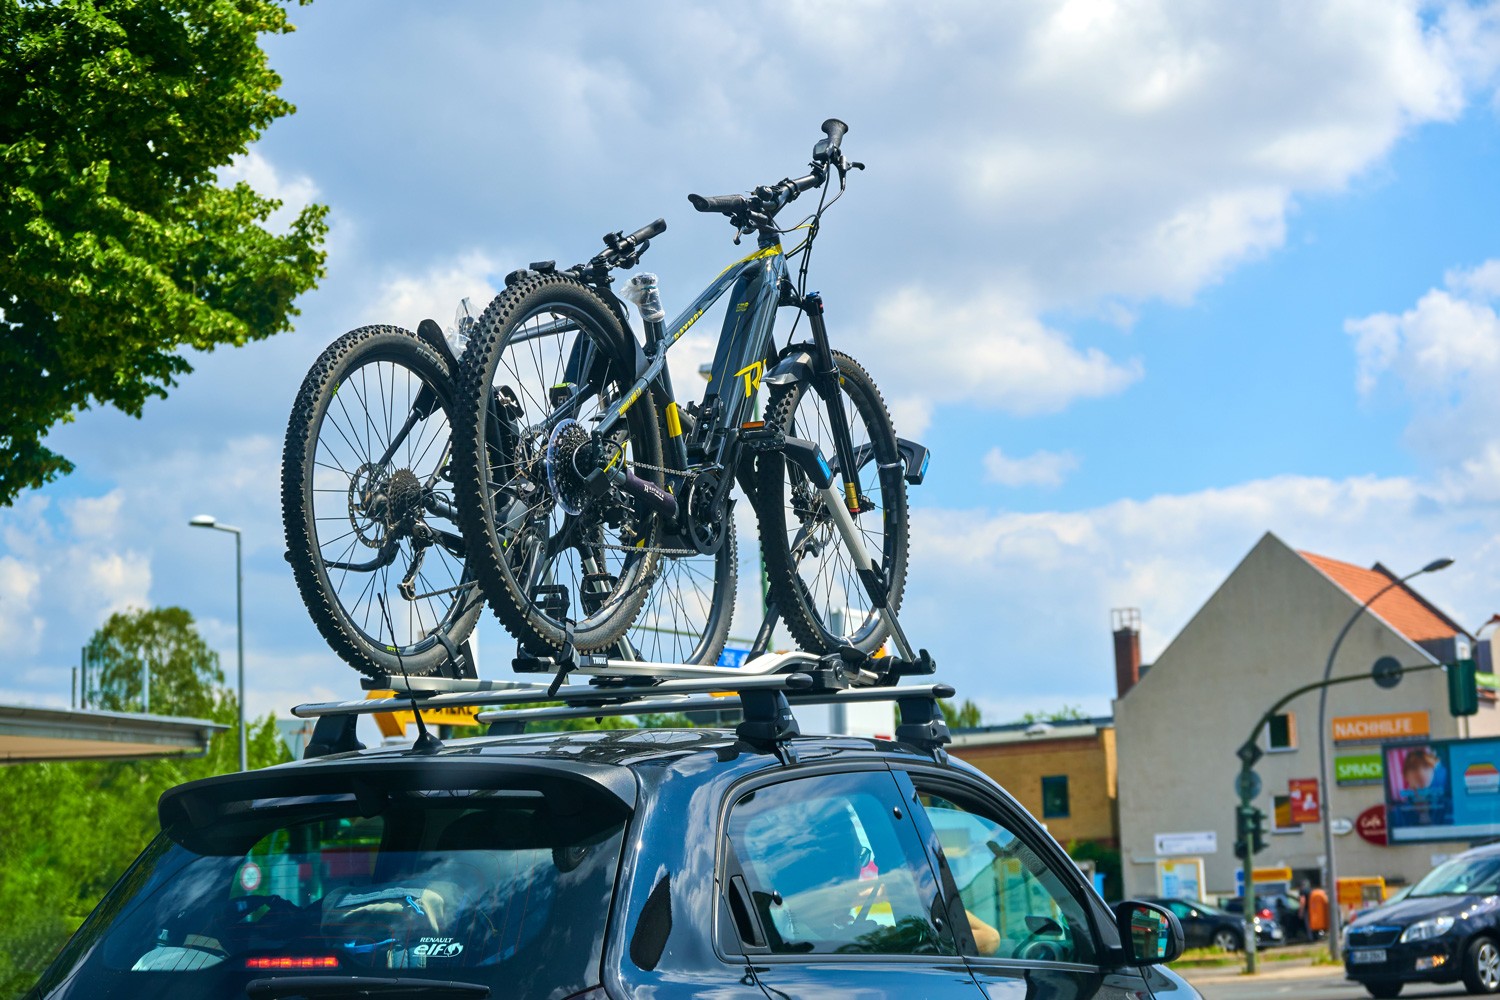 Car with a bike carrier attached on the top and two bicycles mounted on it.